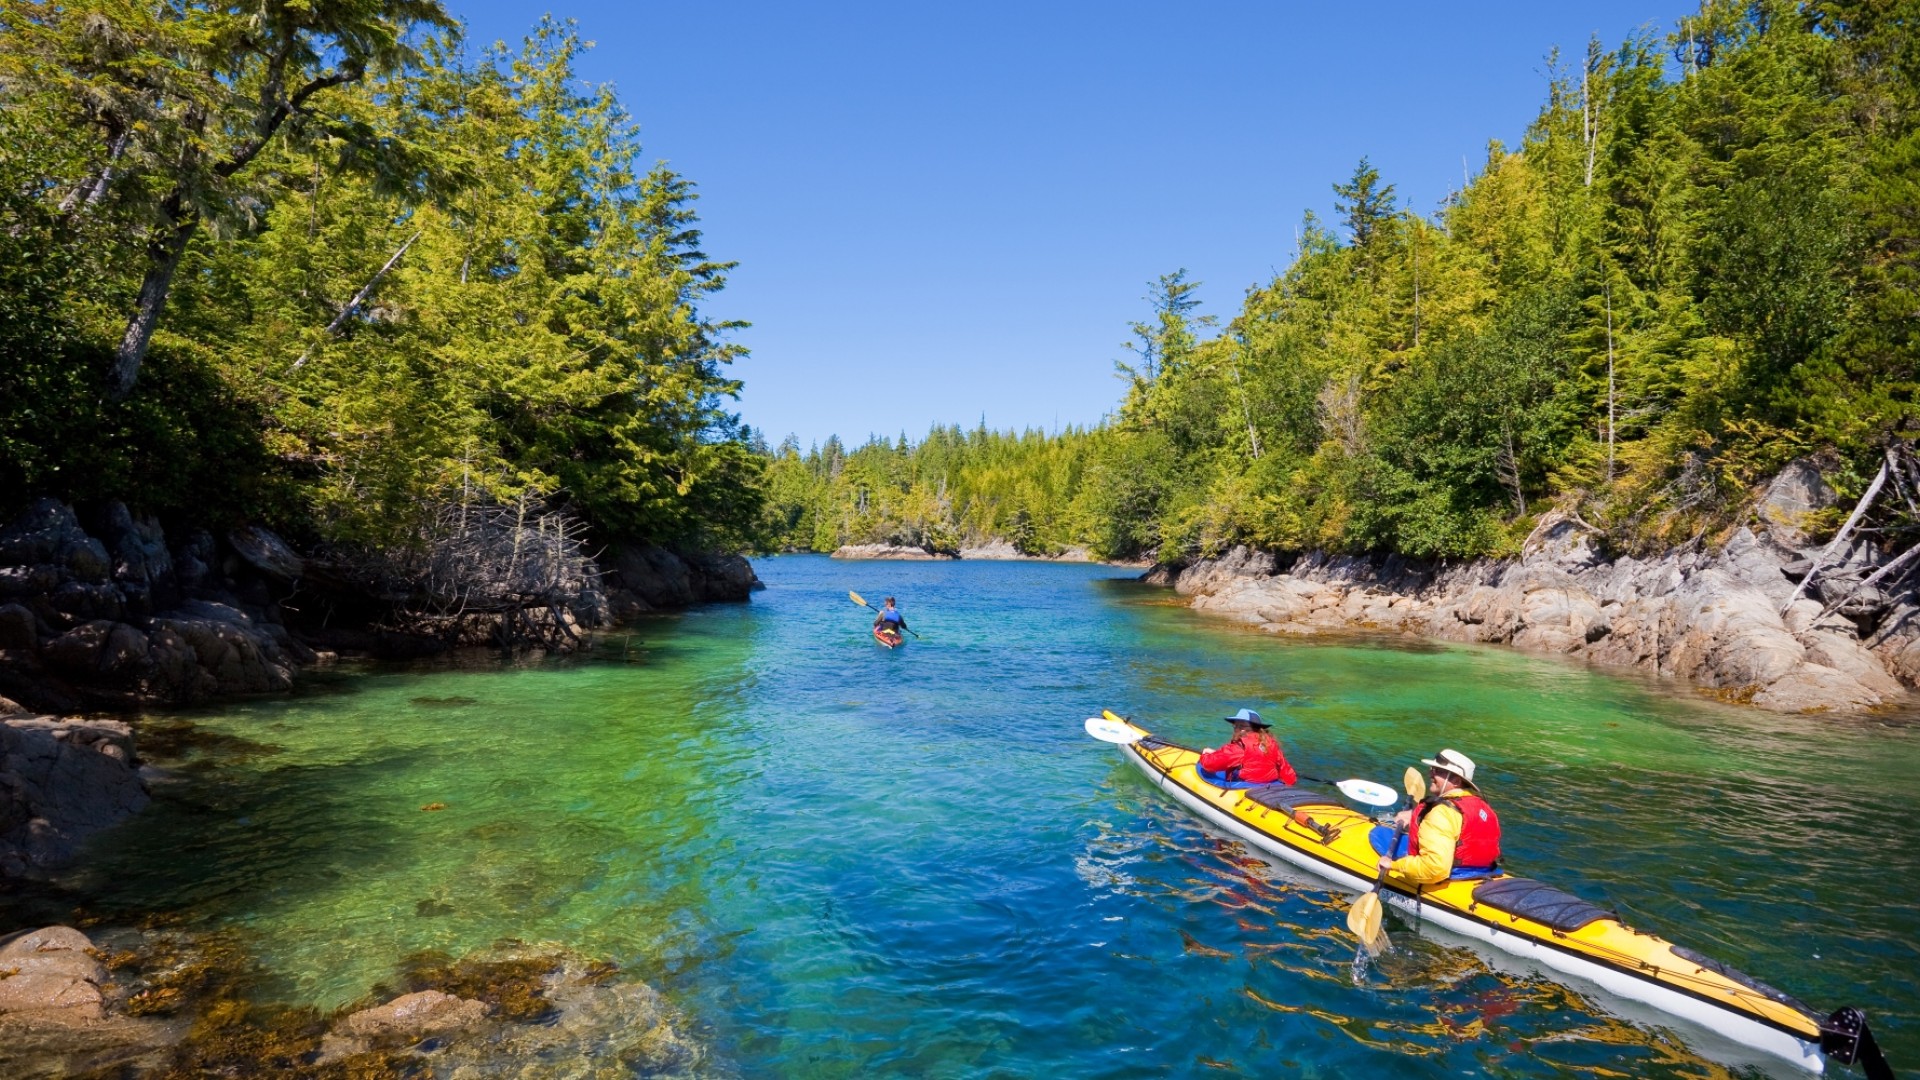 Kayakers paddling through a narrow passage of granite and ponderosa pine trees in God's Pocket Provincial Park